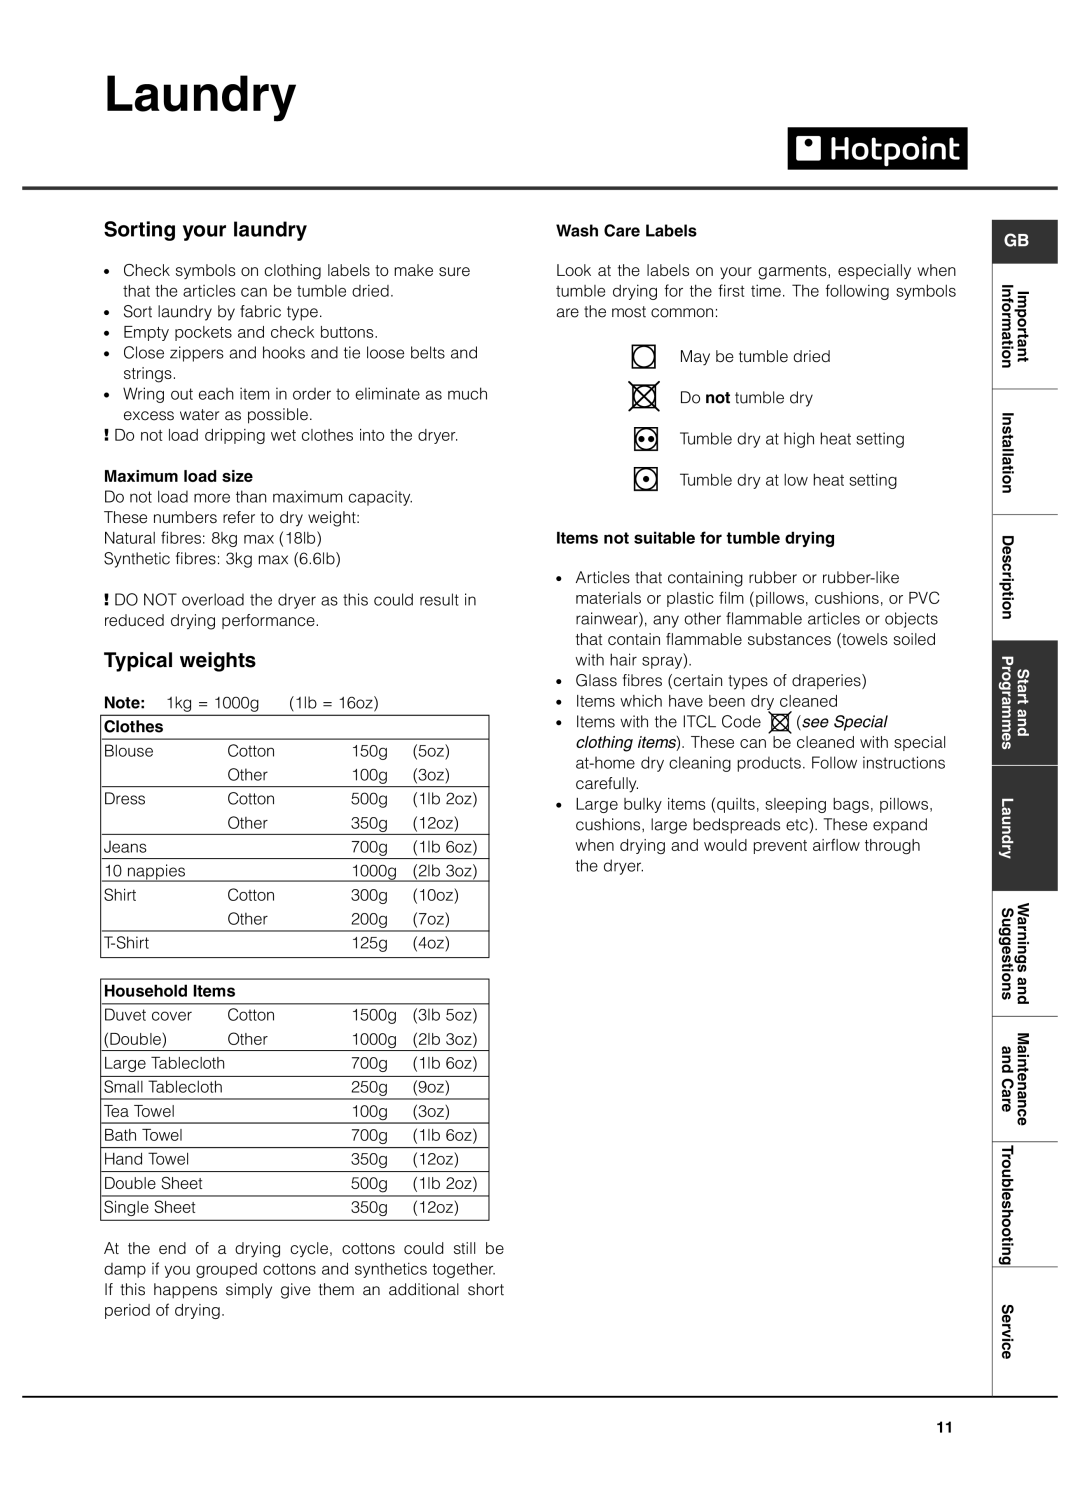 Hotpoint TCEl 87B Experience manual Laundry, Sorting your laundry, Typical weights 